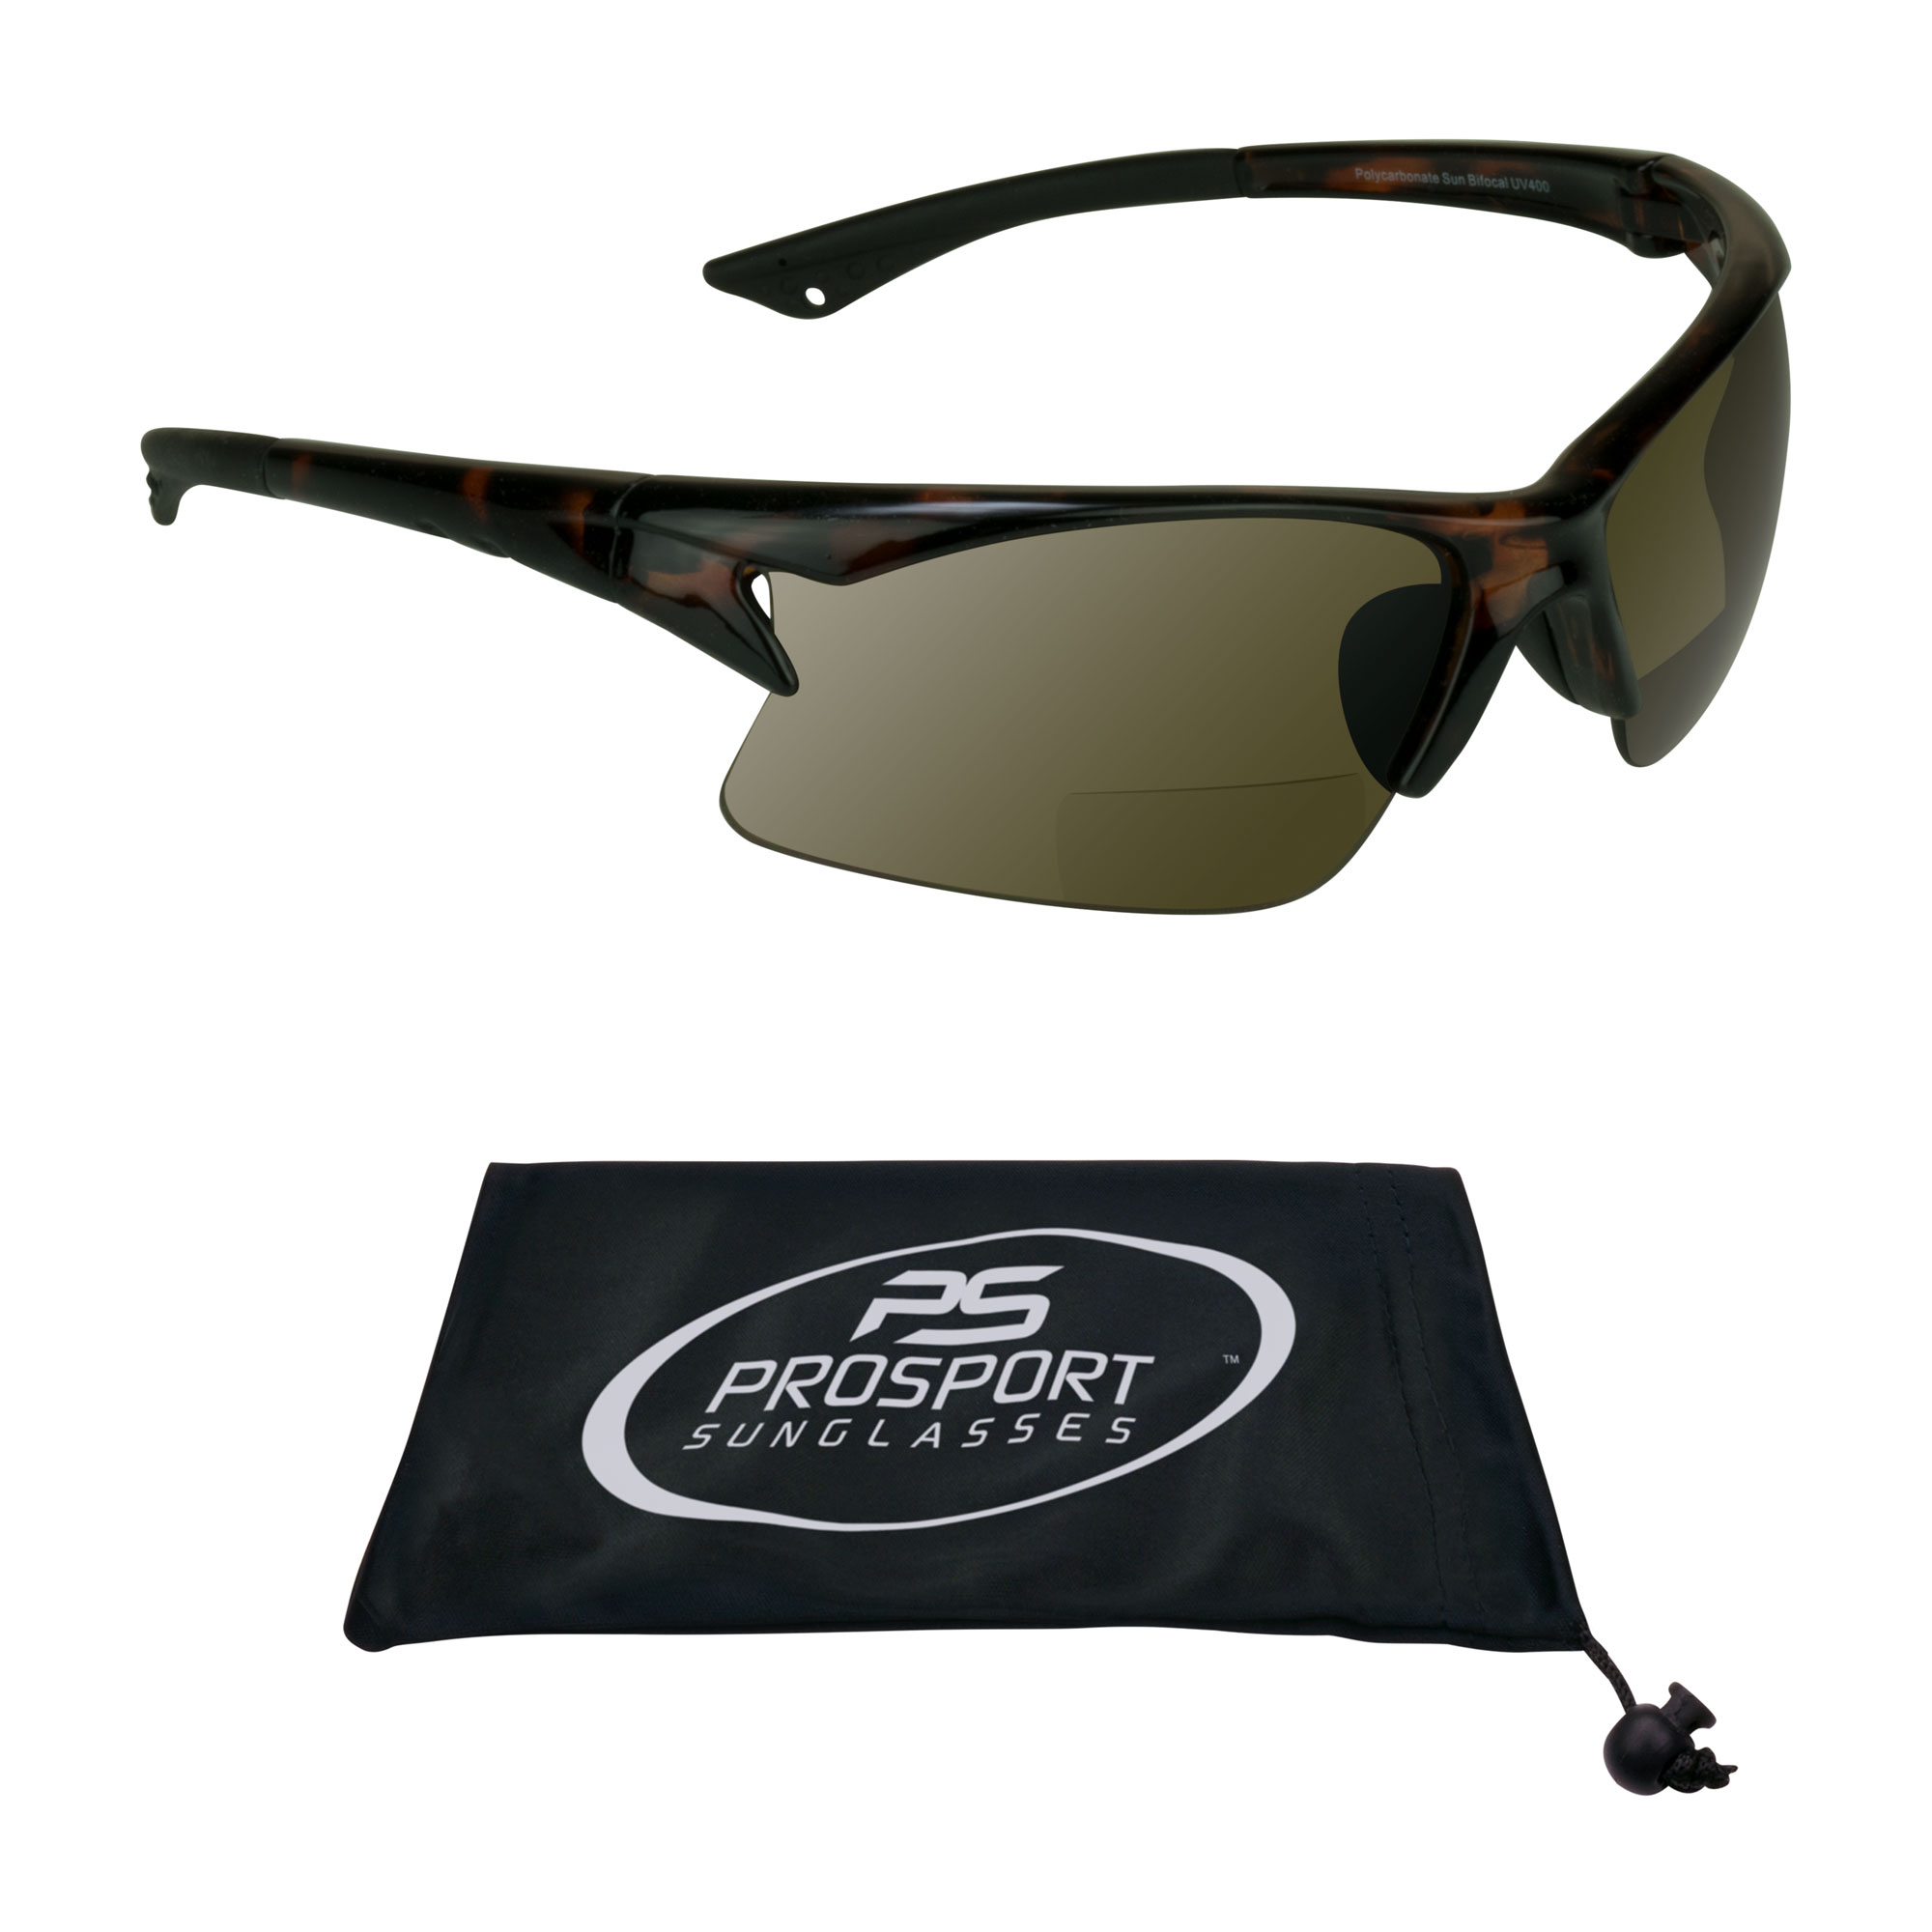 proSPORT Bifocal Sunglasses Readers Men Women For Cycling Running Fishing Golfing Riding and Driving - image 1 of 6